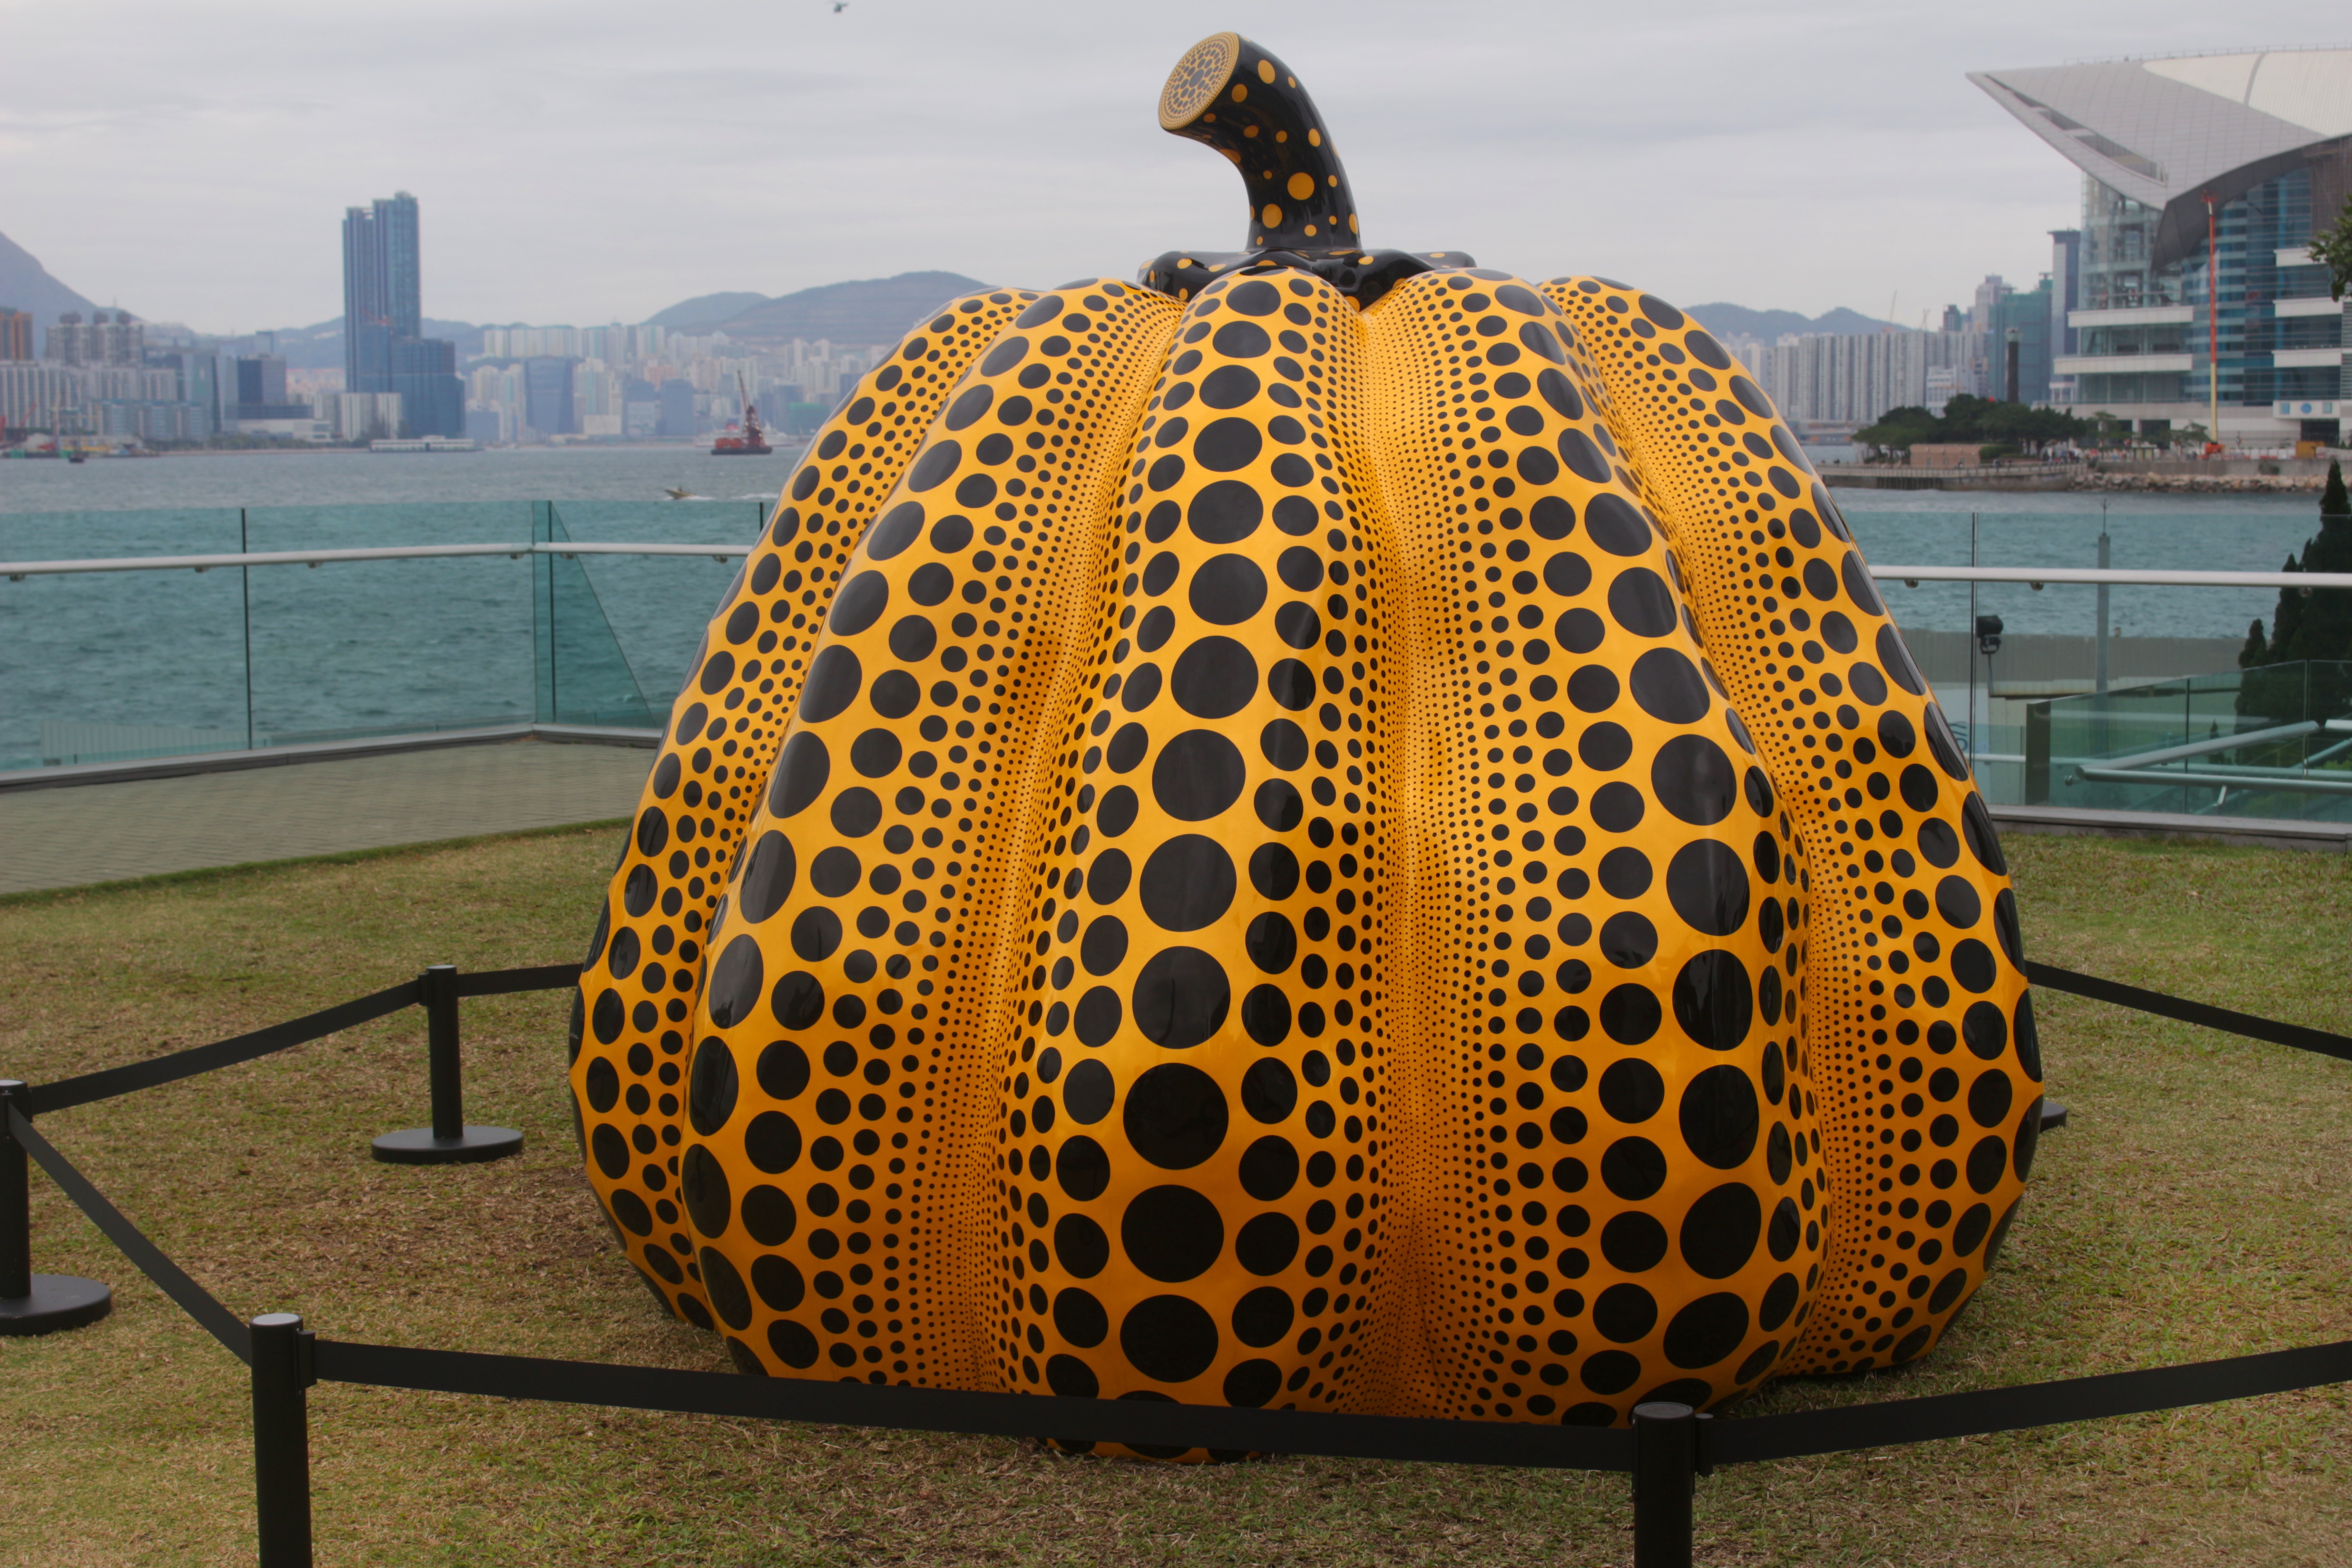 Pumpkin:big, by Yayoi Kusama at the Harbour Arts Sculpture Festival. Photo by Vicky Wong.